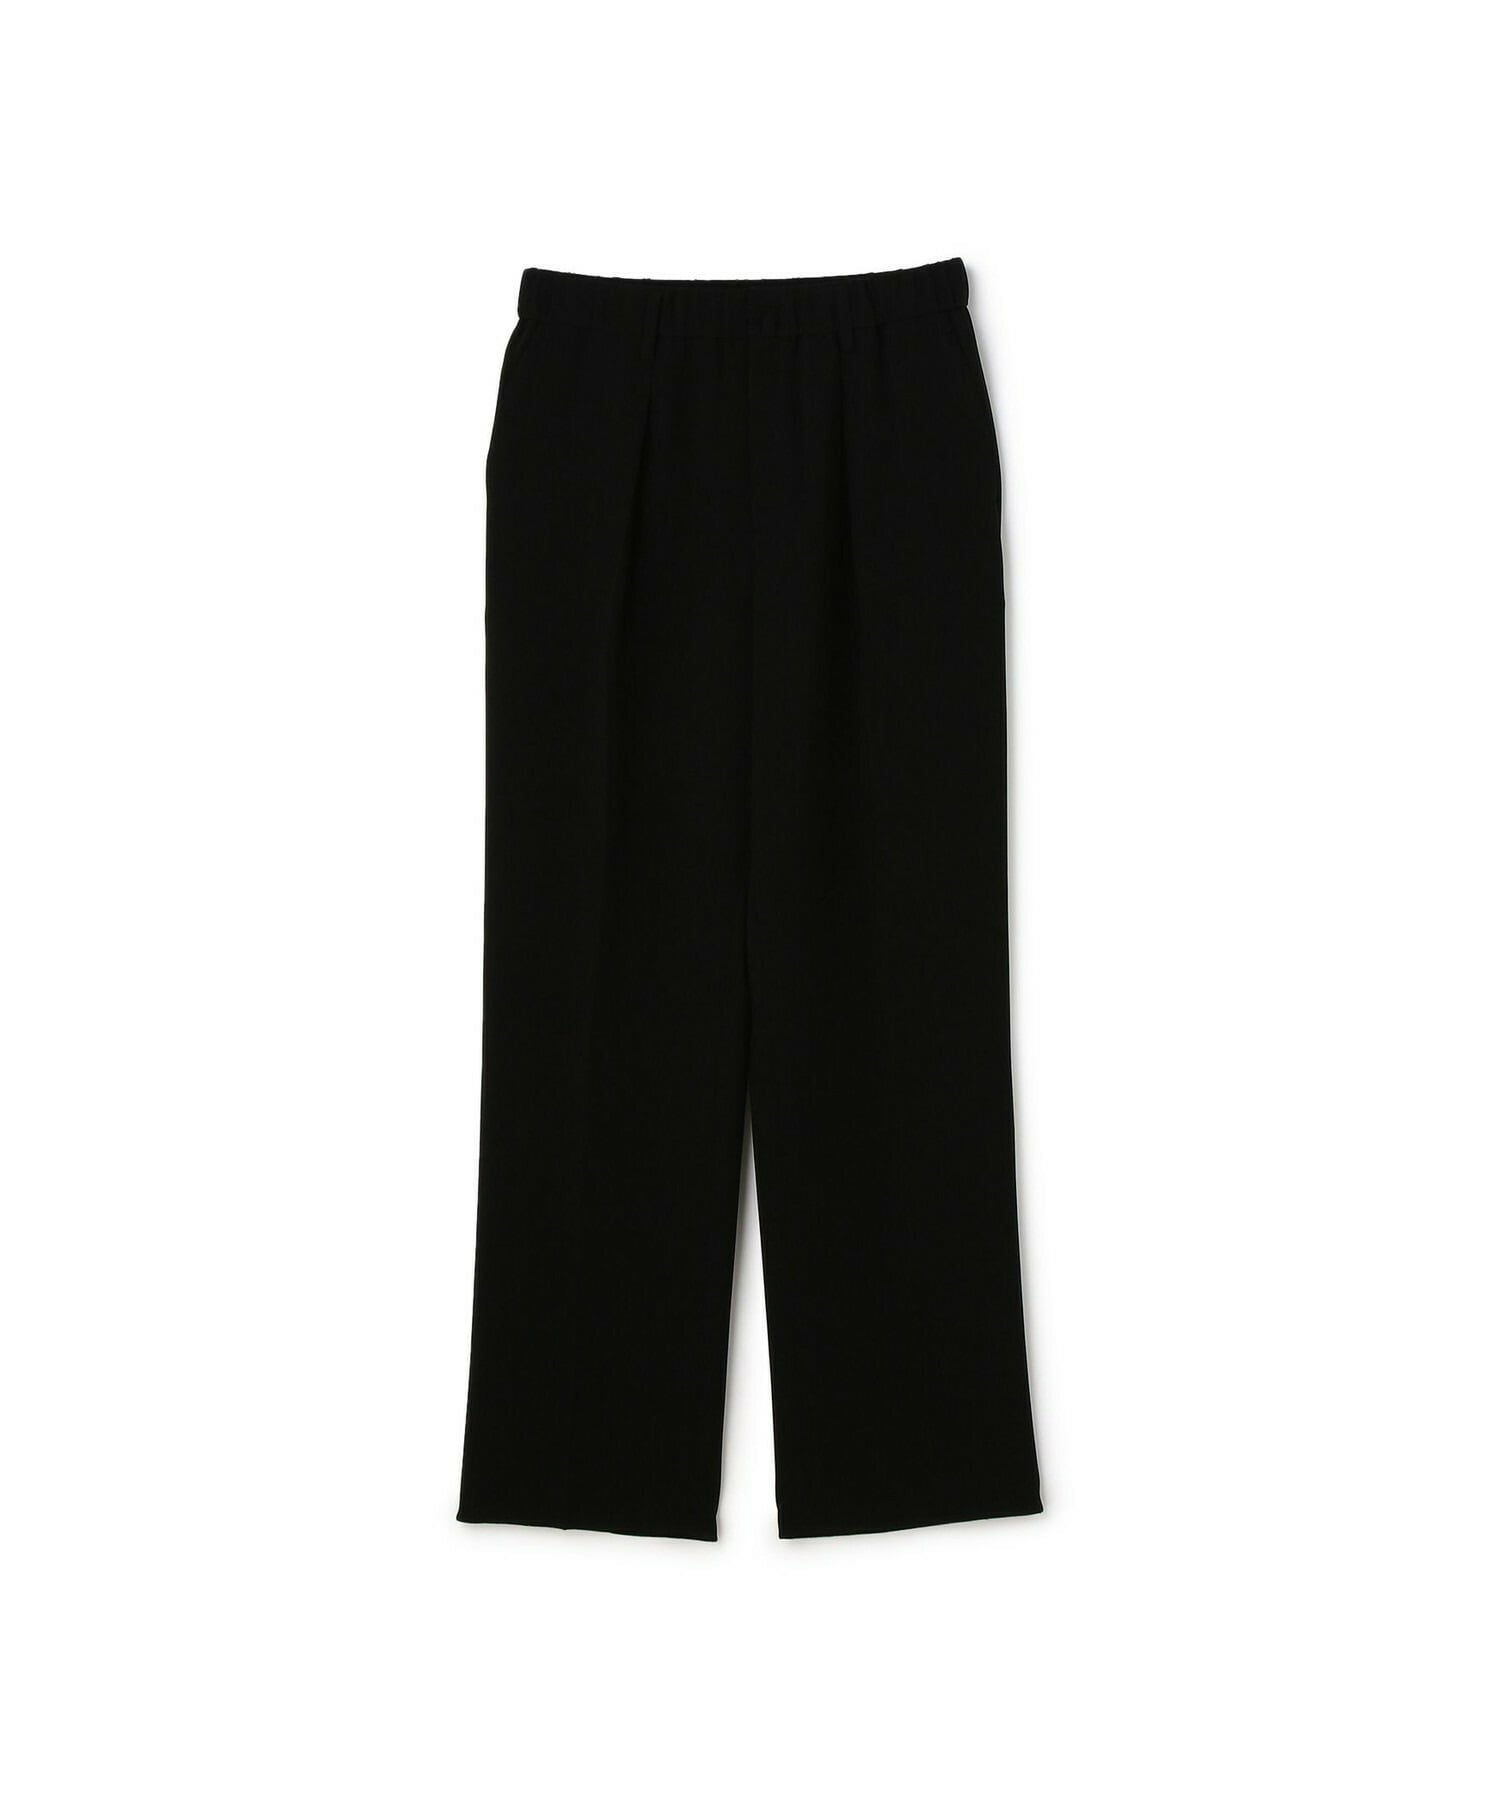 【yoshie inaba】LIGHT DOUBLE CLOTH MODERN TROUSERS W/GATHER BELT 詳細画像 ブラック 1